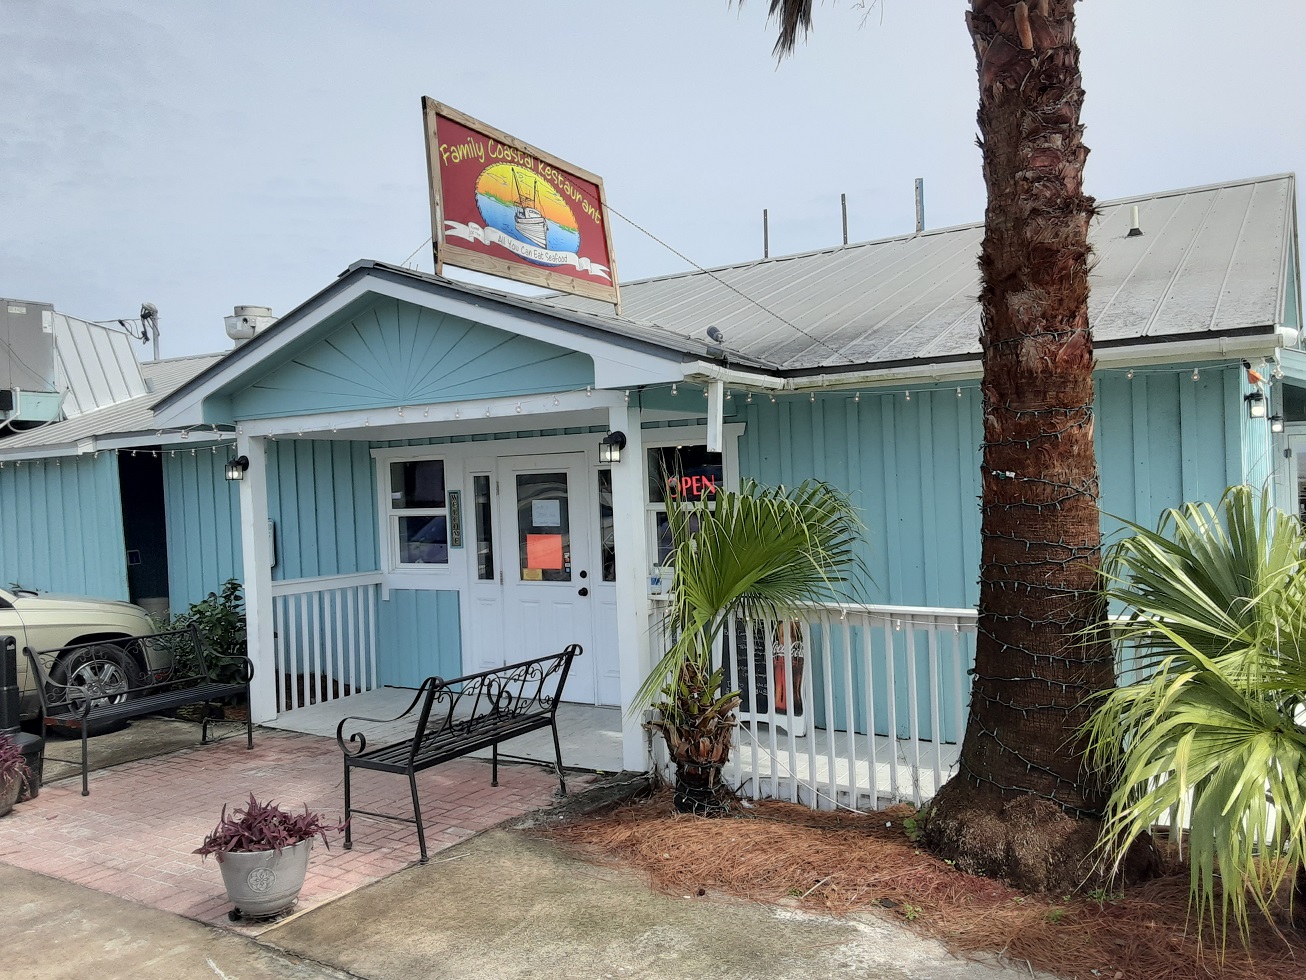 Big Dude's Eclectic Ramblings: Florida Trip Day 3&4, East Point, FL